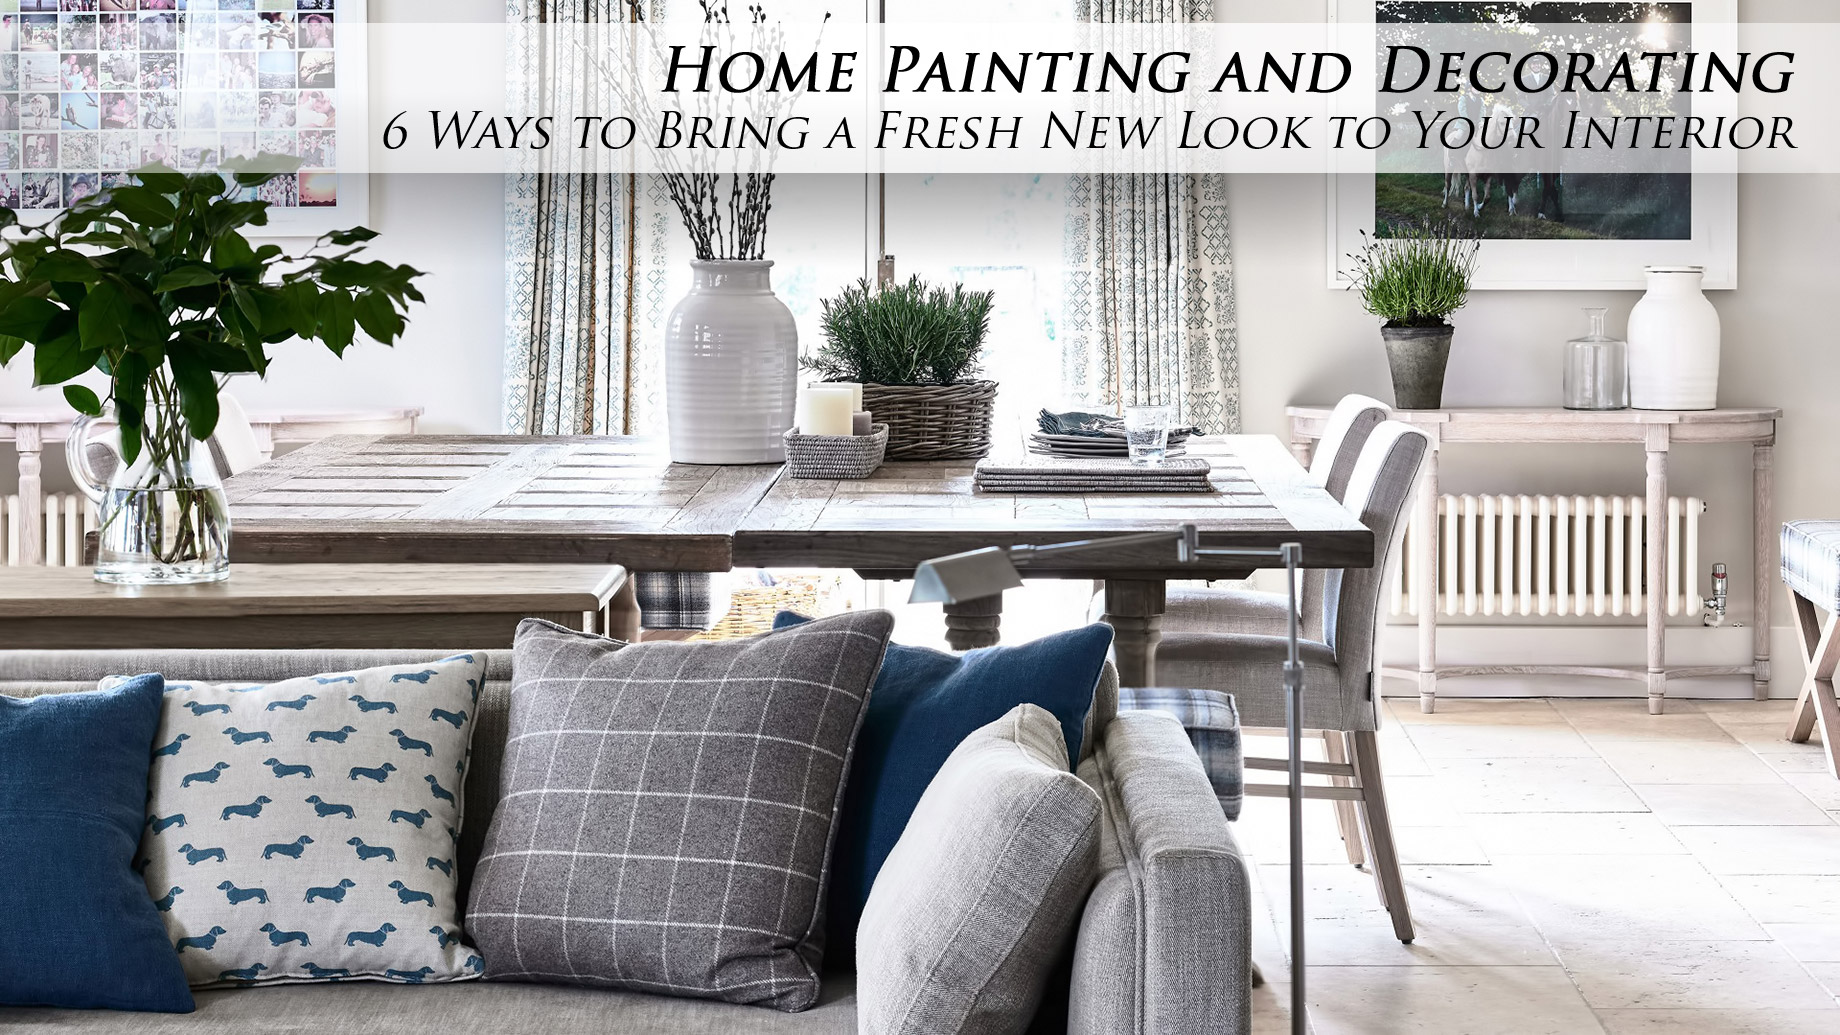 Home Painting and Decorating - 6 Ways to Bring a Fresh New Look to Your Interior